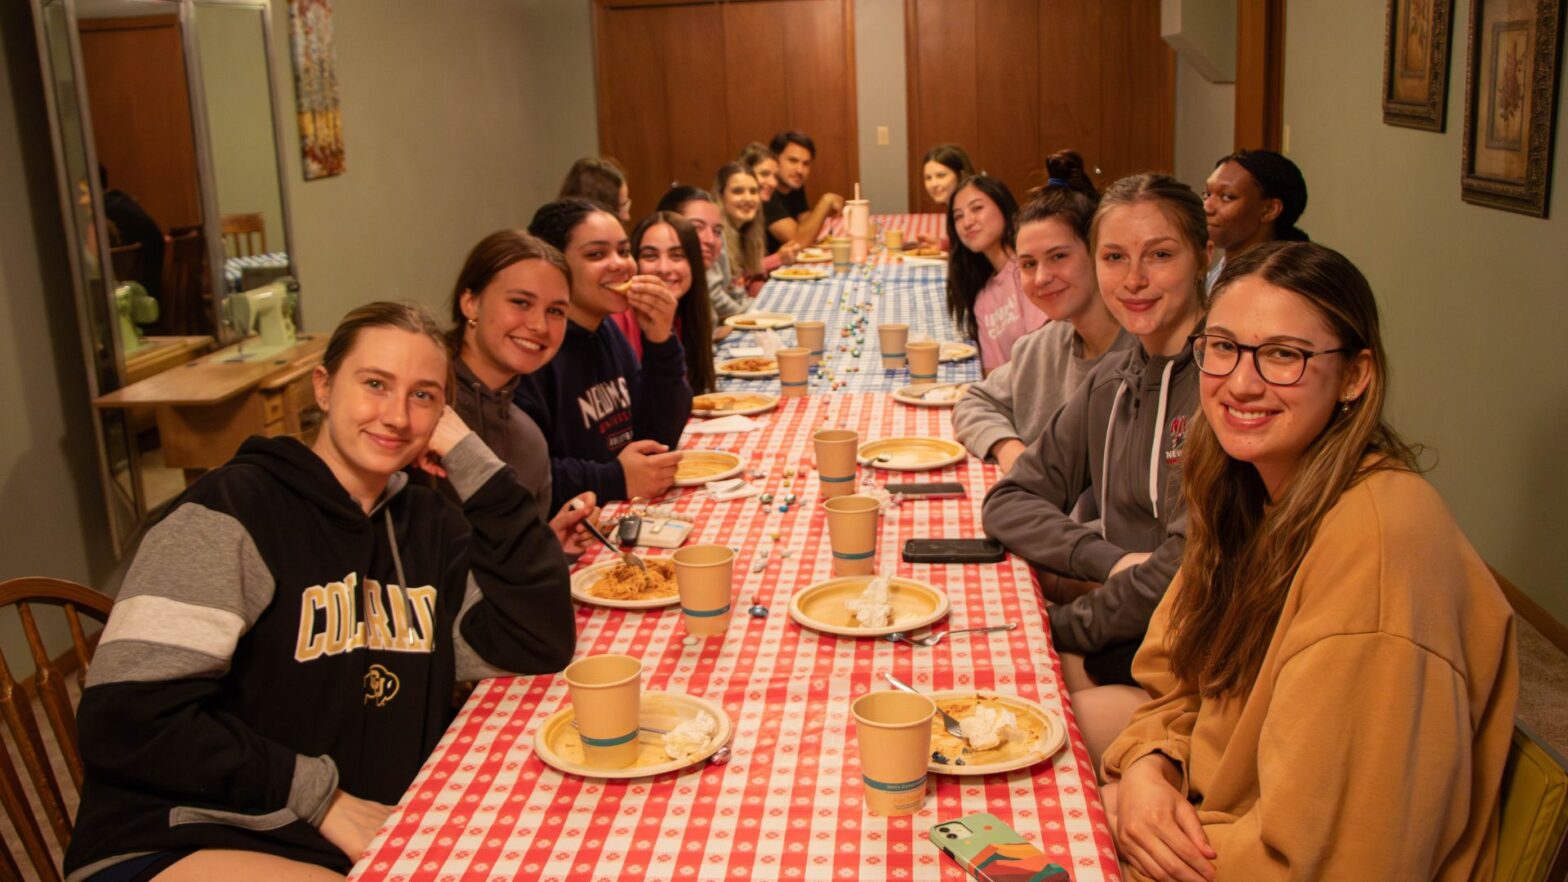 Students gather at The Landing for a Spaghetti Supper hosted by the ASC sisters at Newman University.